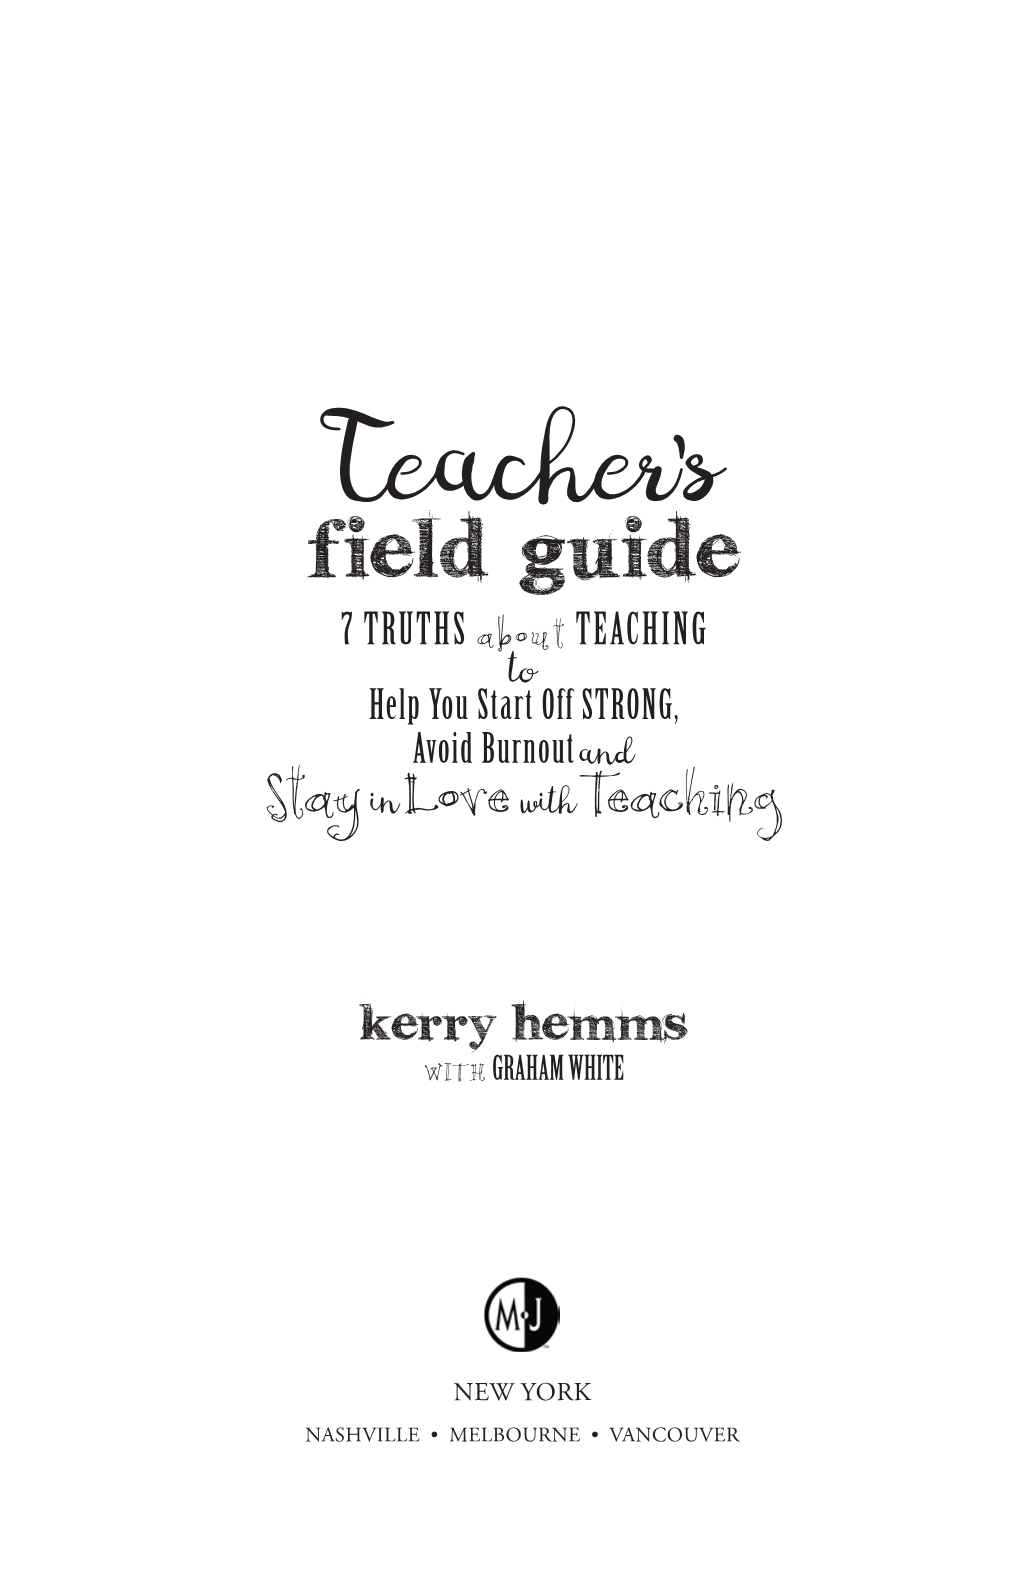 Field Guide 7 TRUTHS About TEACHING to Help You Start Off STRONG, Avoid Burnout, and Stay in Love with Teaching